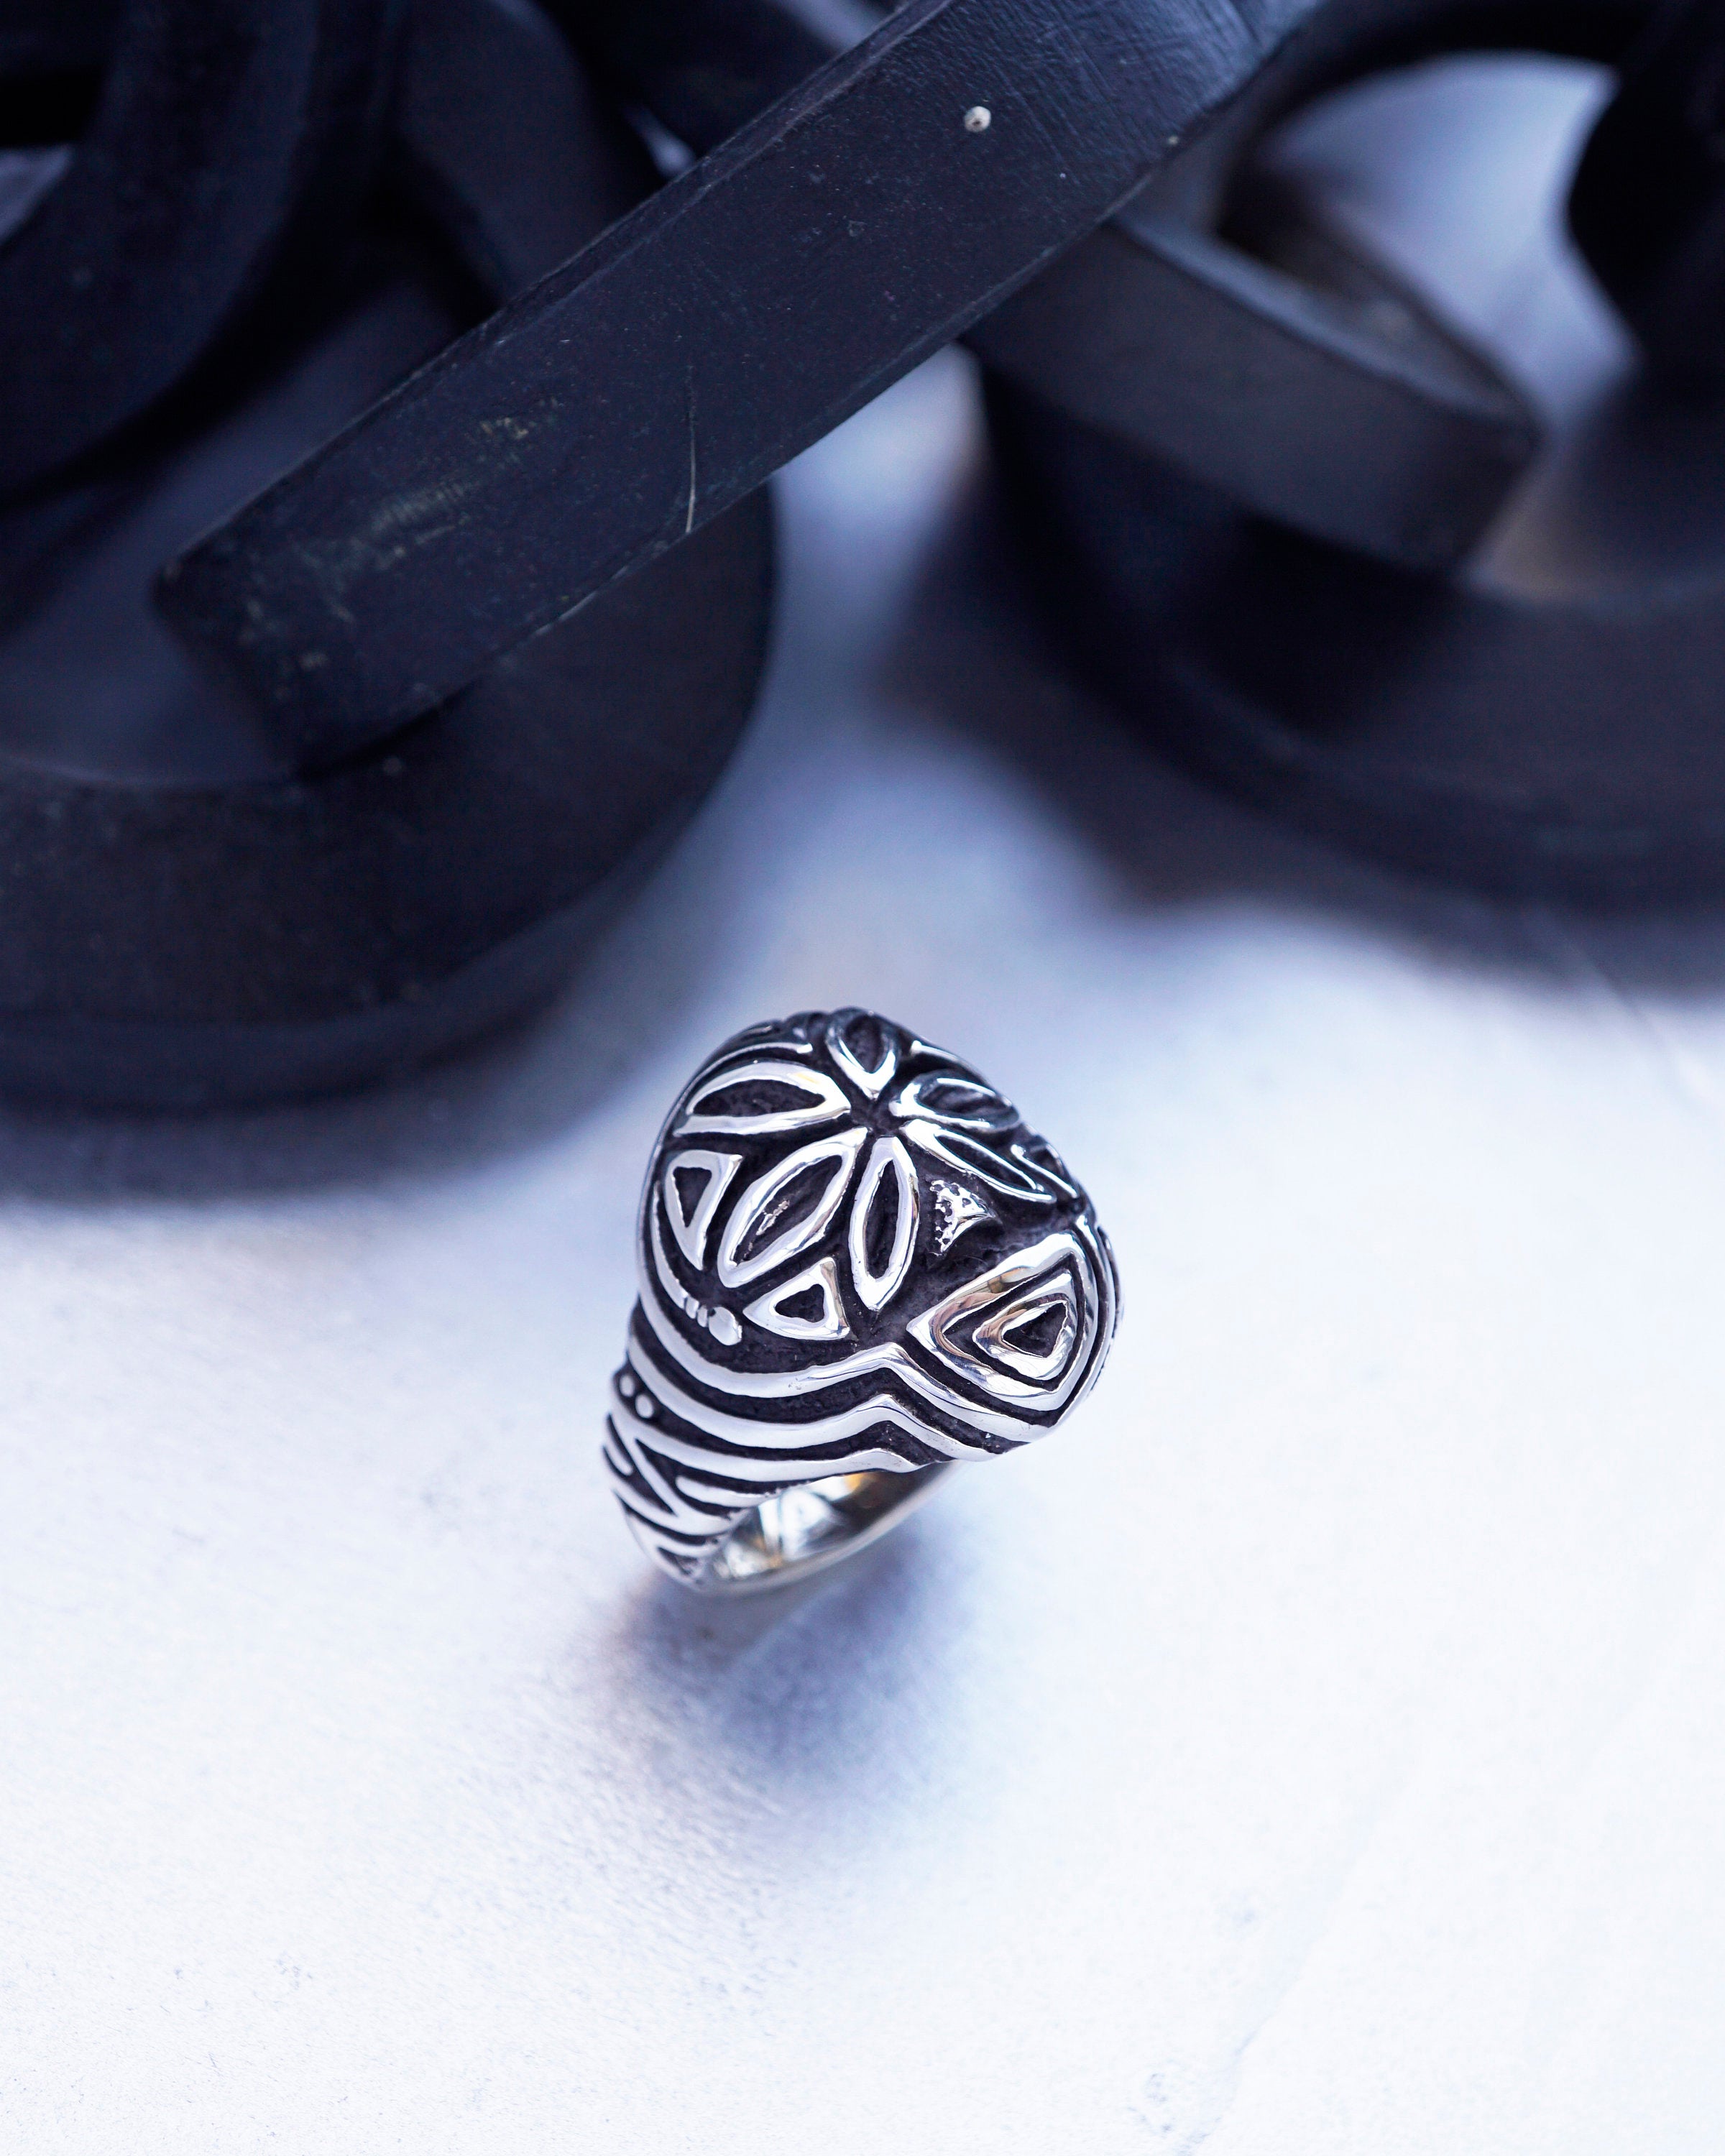 Cyberpunk jewelry, Mens silver ring, Unique mens ring, Signet ring men, Mens pinky ring, Antique mens ring 